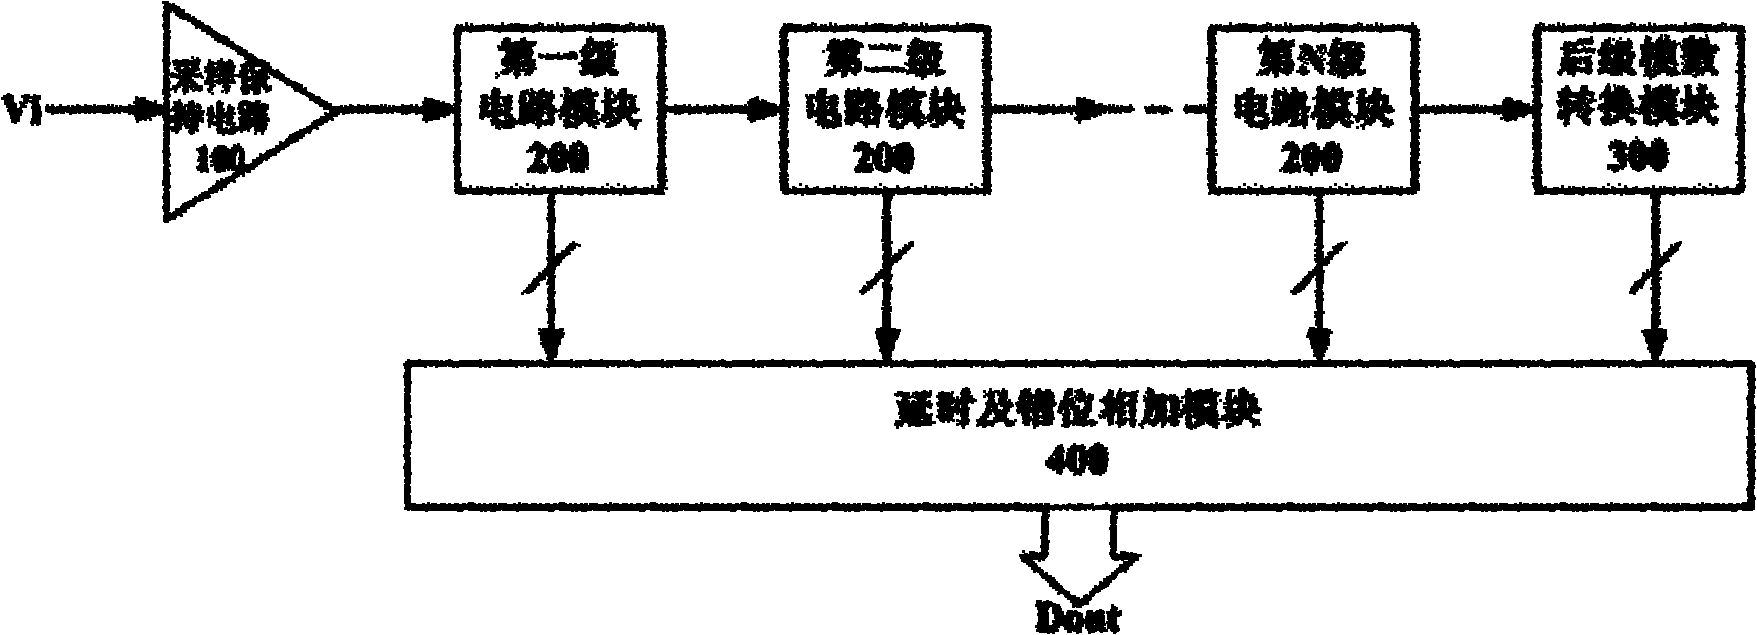 Pipelined analog-to-digital converter (ADC) capable of carrying out background digital calibration